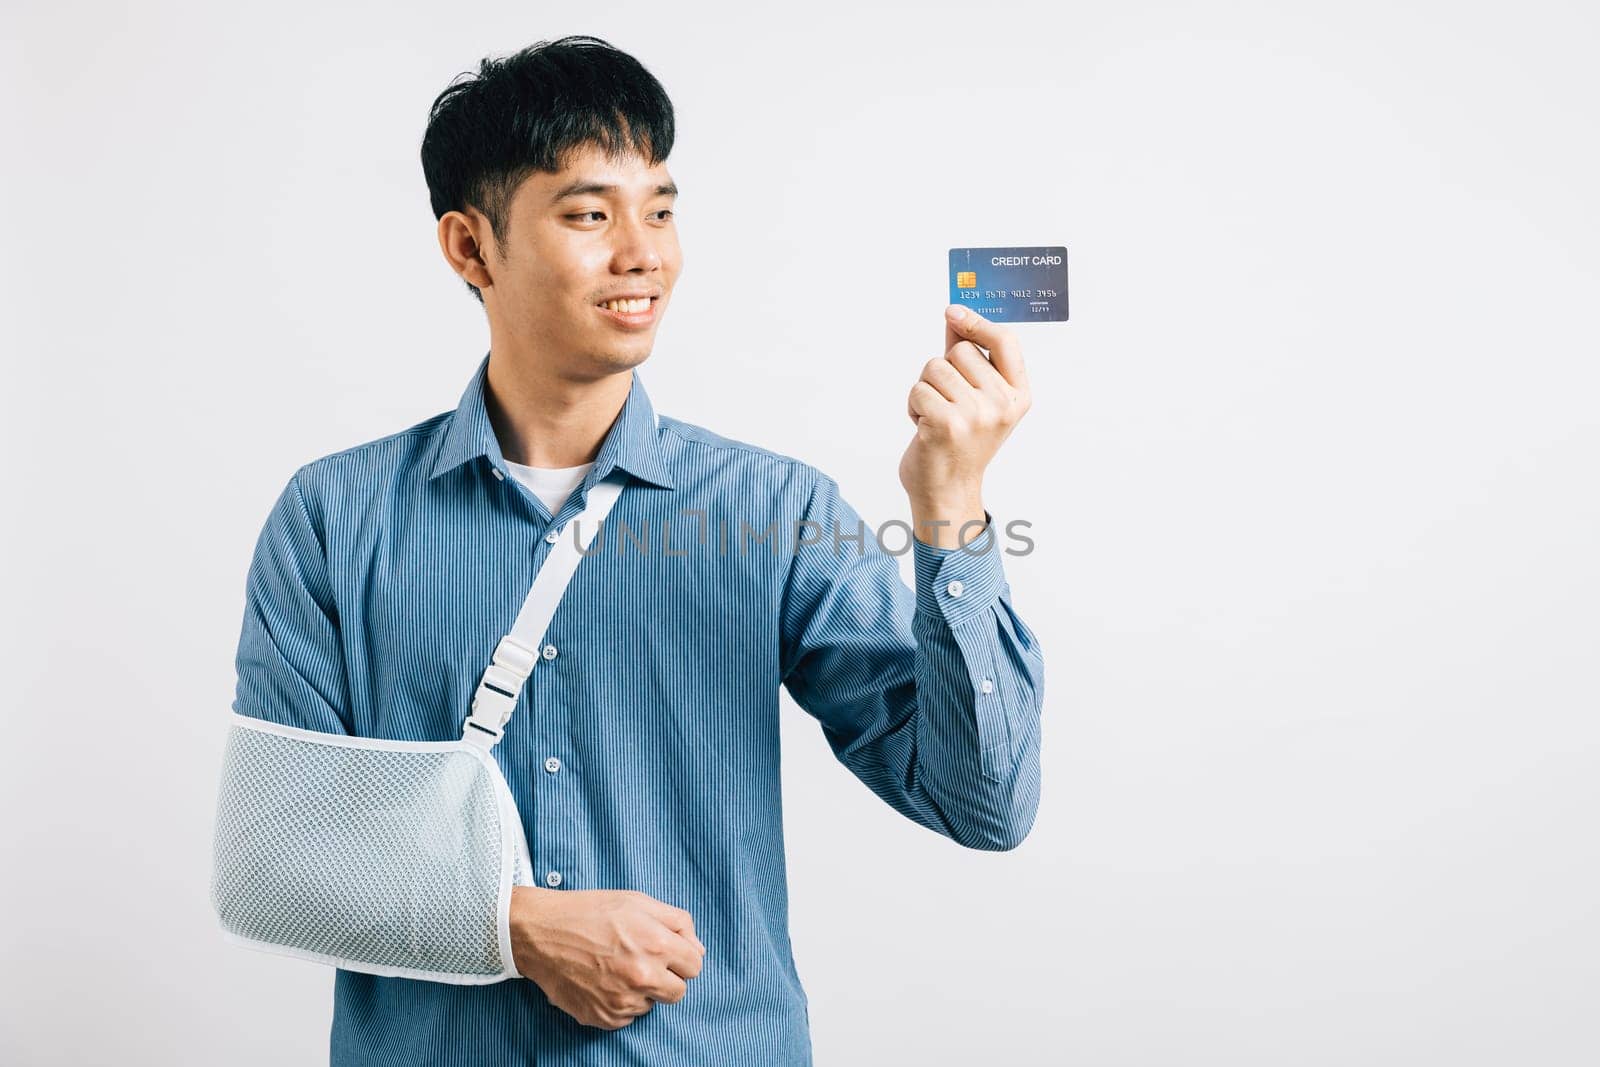 A confident man copes with a broken arm, using credit card by Sorapop